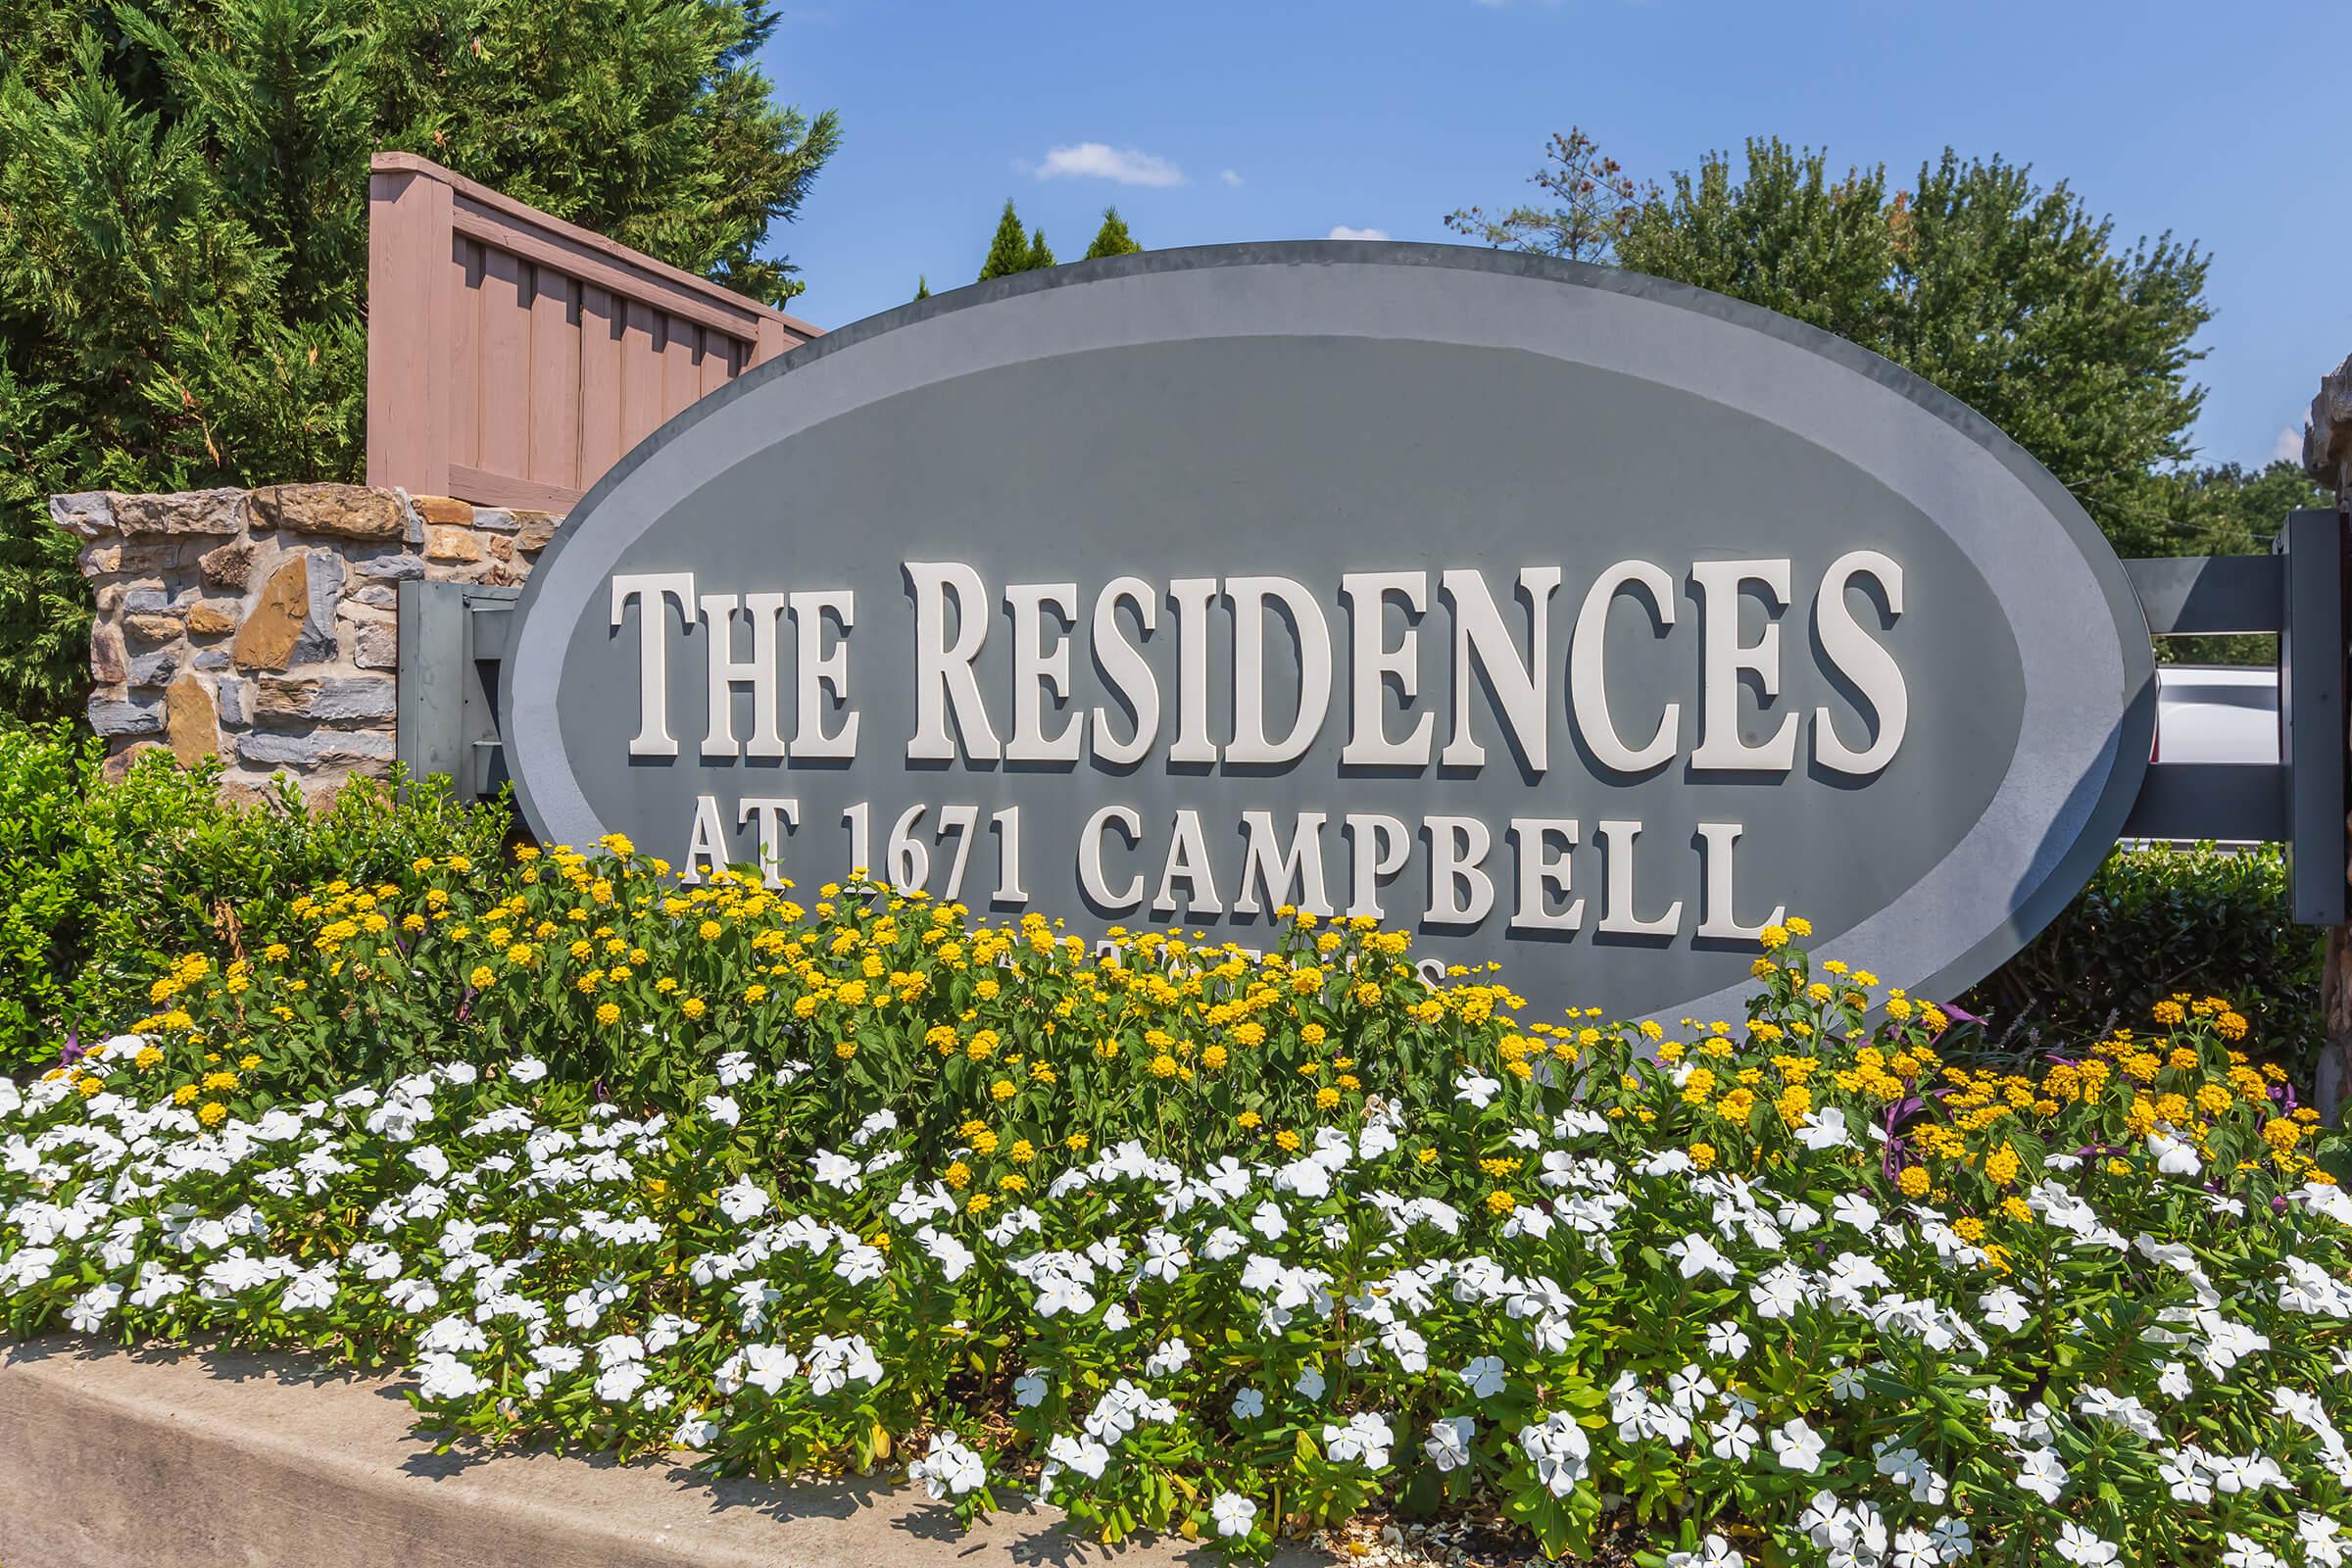 Welcome home to The Residences at 1671 Campbell in Clarksville, Tennessee